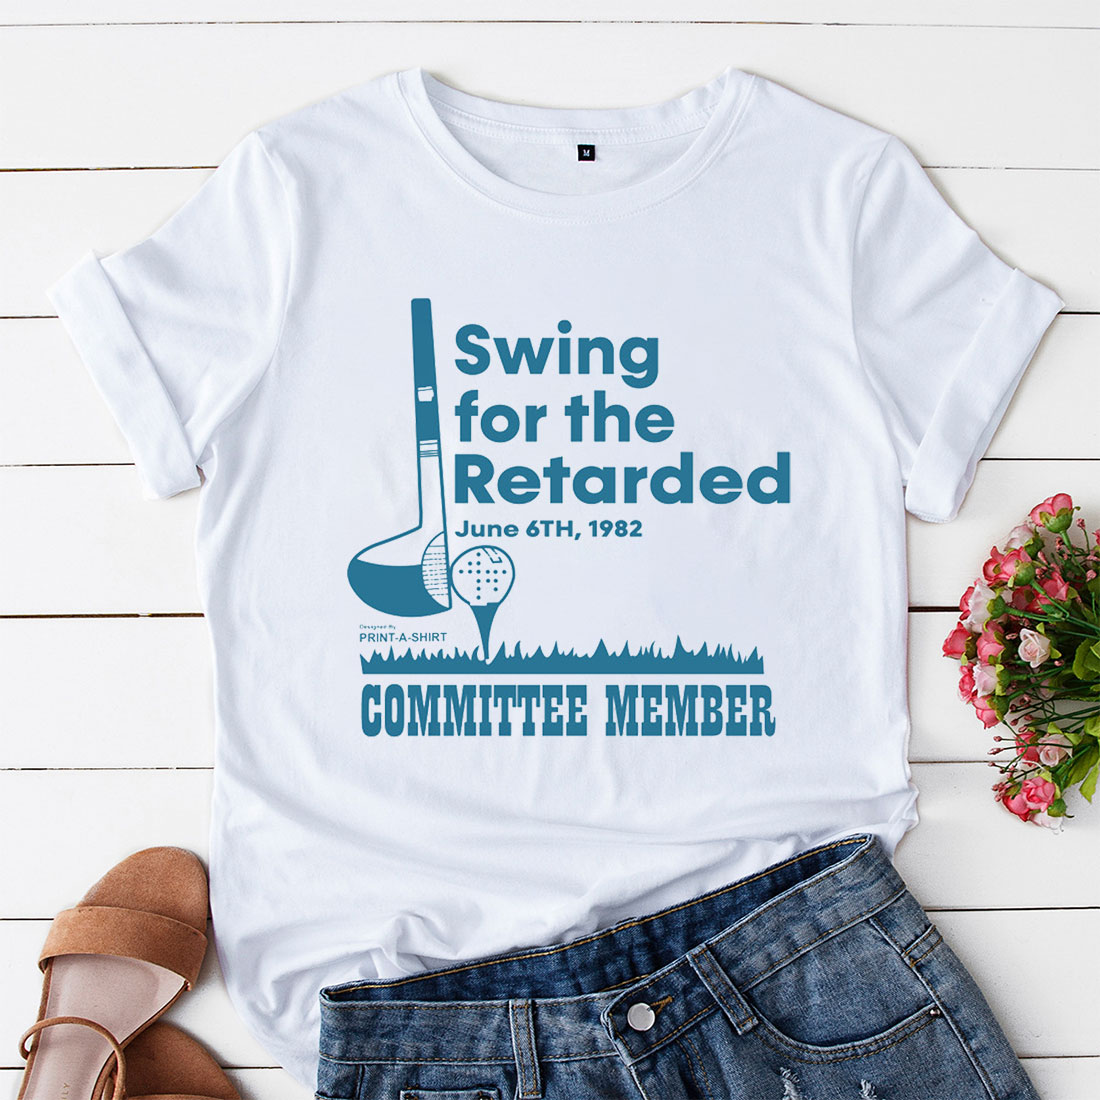 swing for the retarded committee member shirt